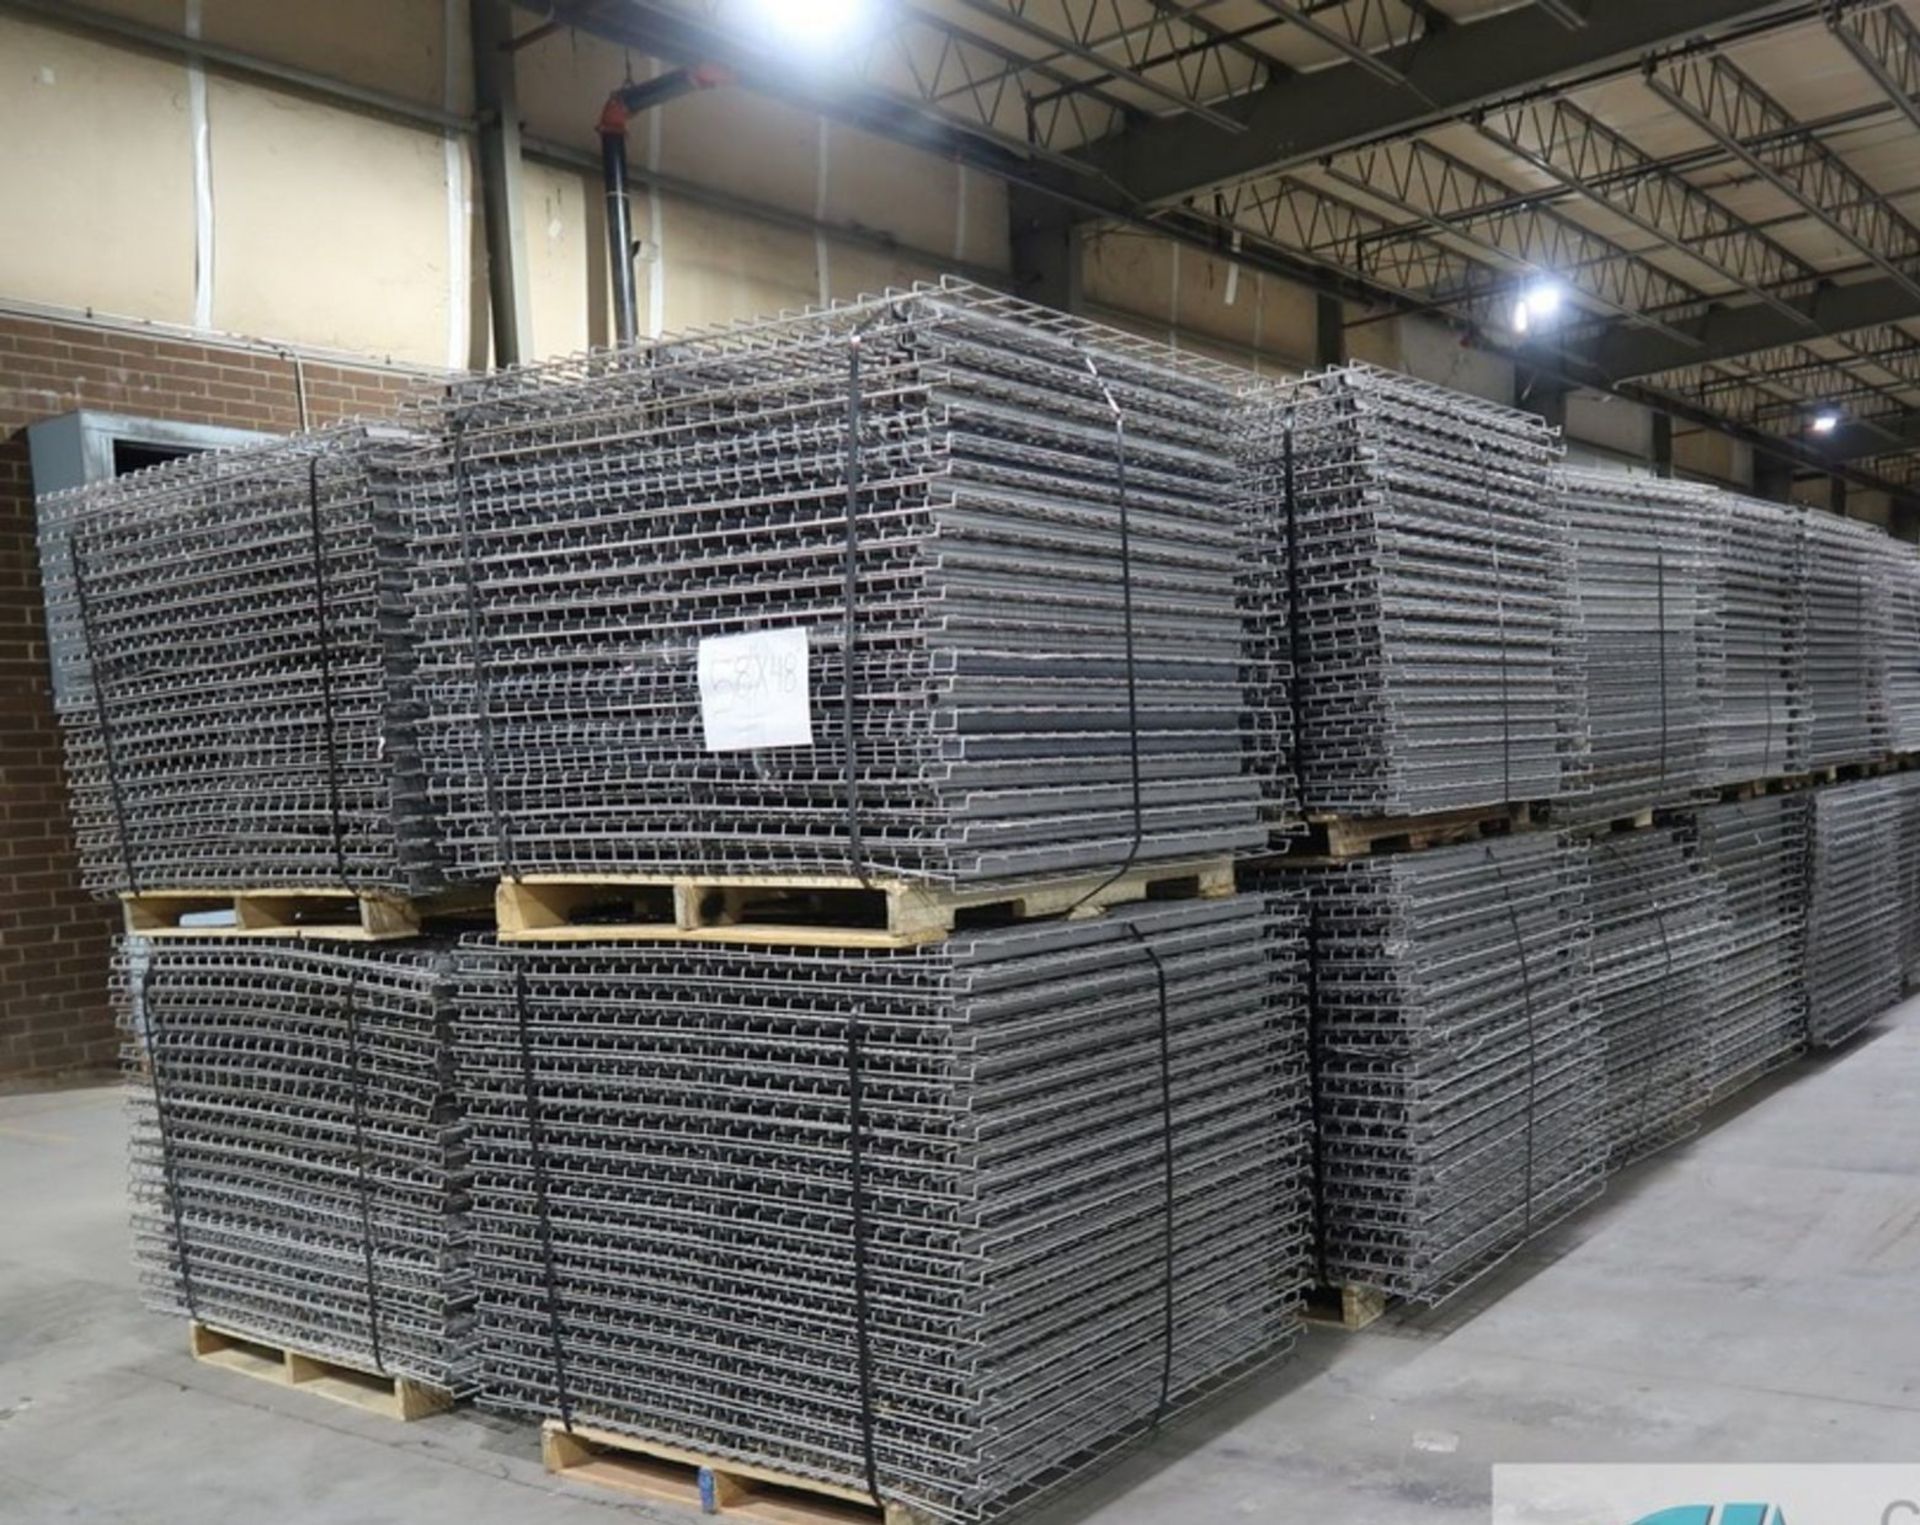 PALLET OF 3-CHANNEL WIRE DECKING, 58” X 48”. EACH PALLET CONTAINS 40 SECTIONS OF WIRE DECKS